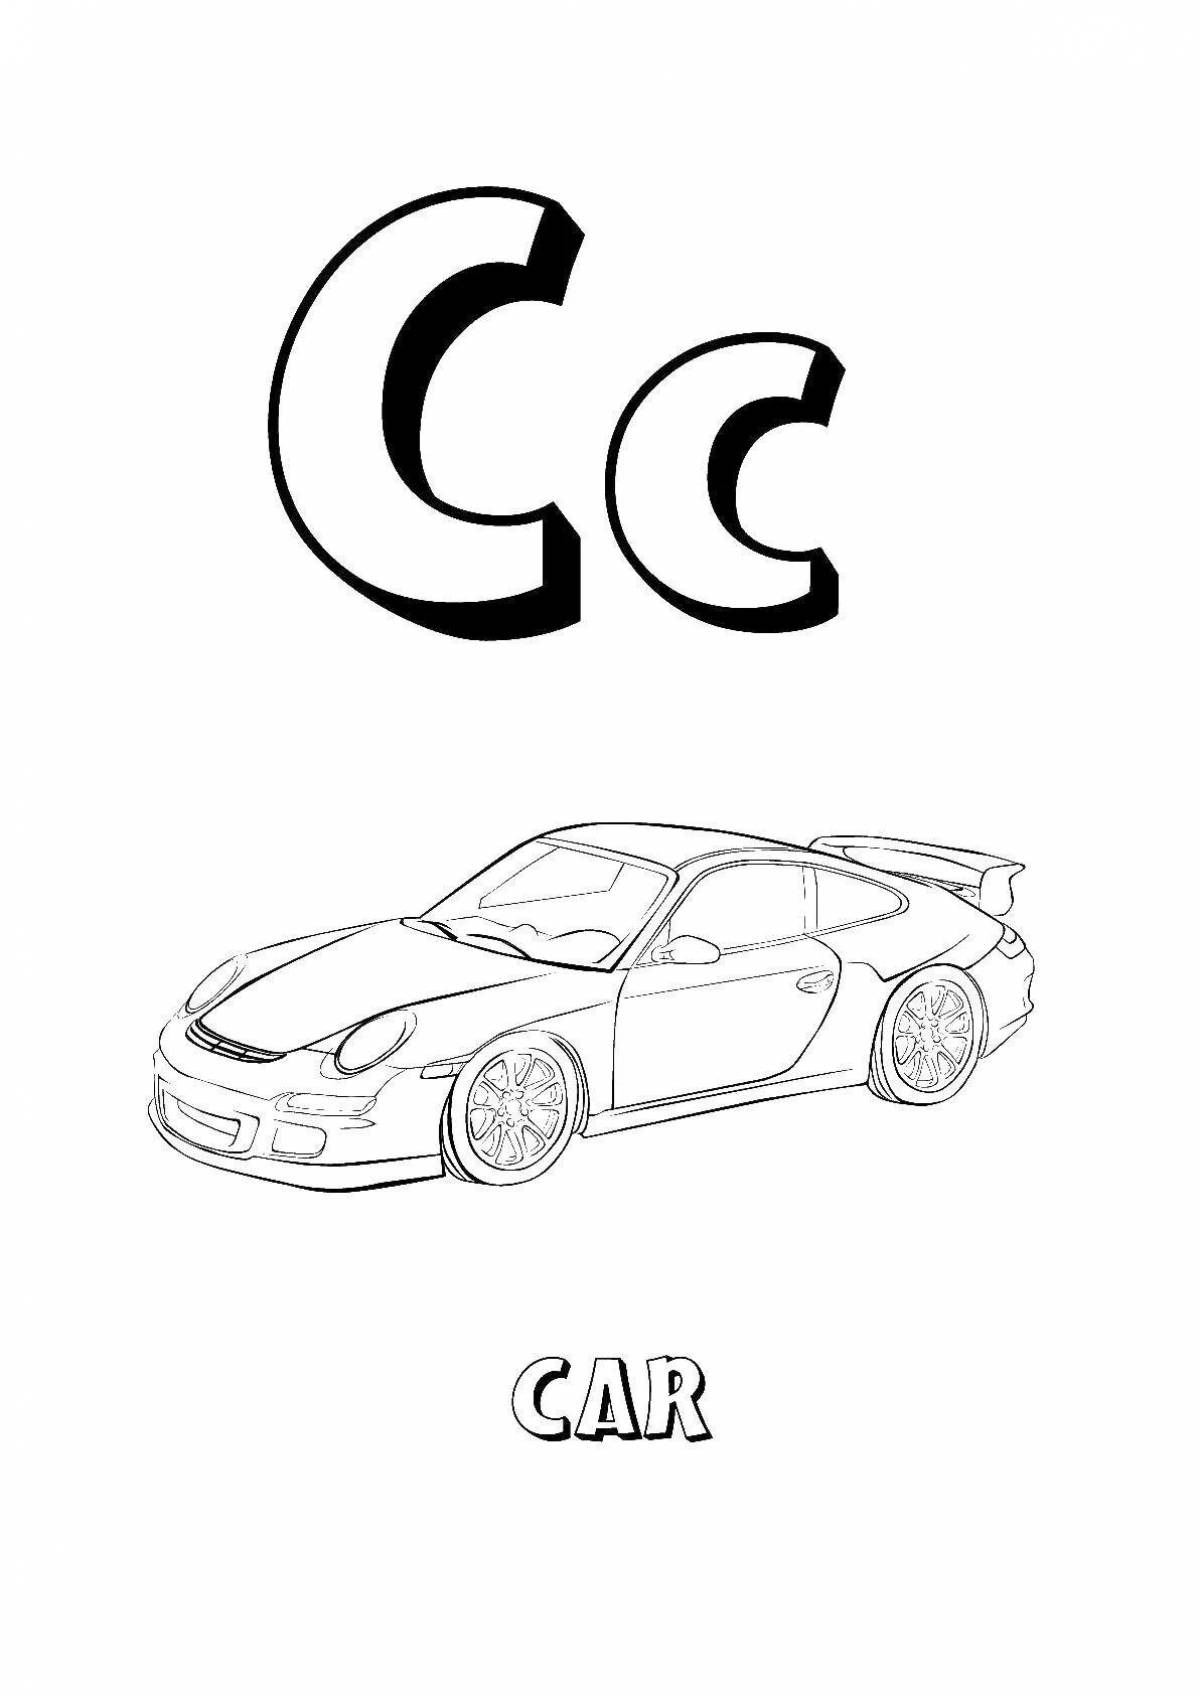 Exciting alphabet coloring page